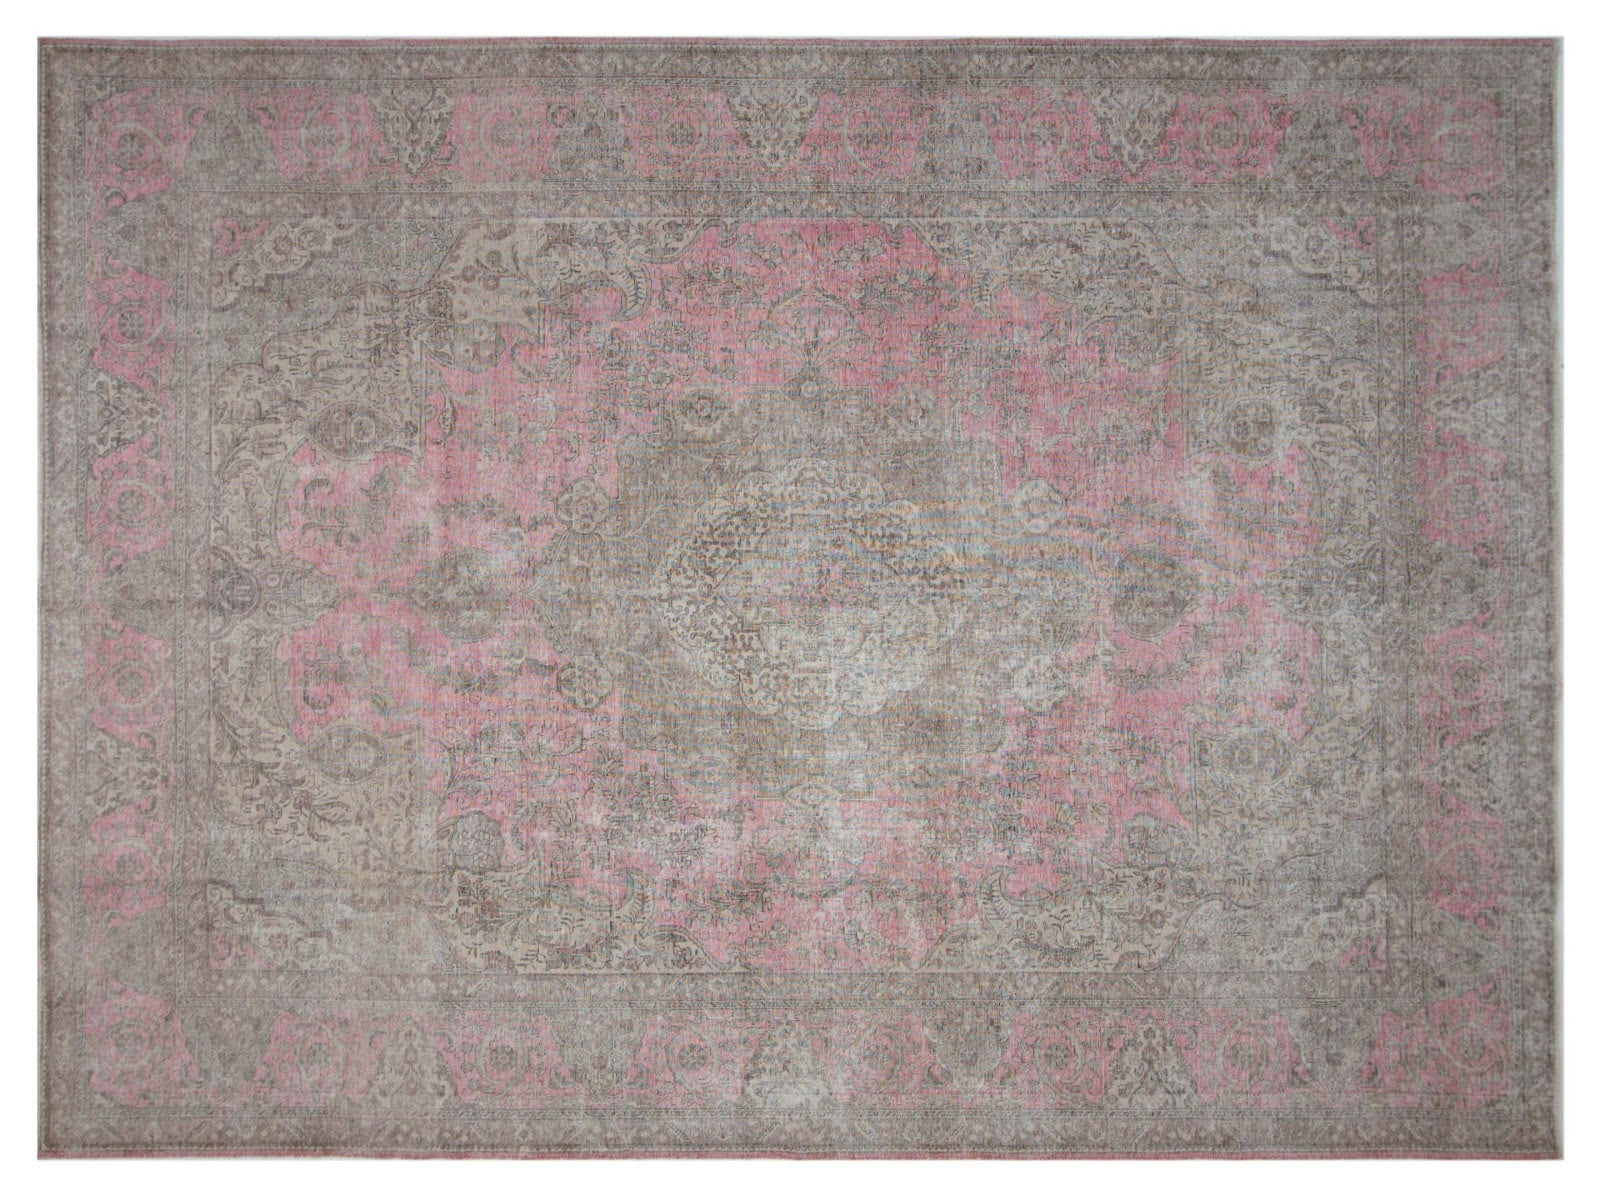 12x15 hand-knotted vintage wool rug with faded medallion design, beige border, and pink touches